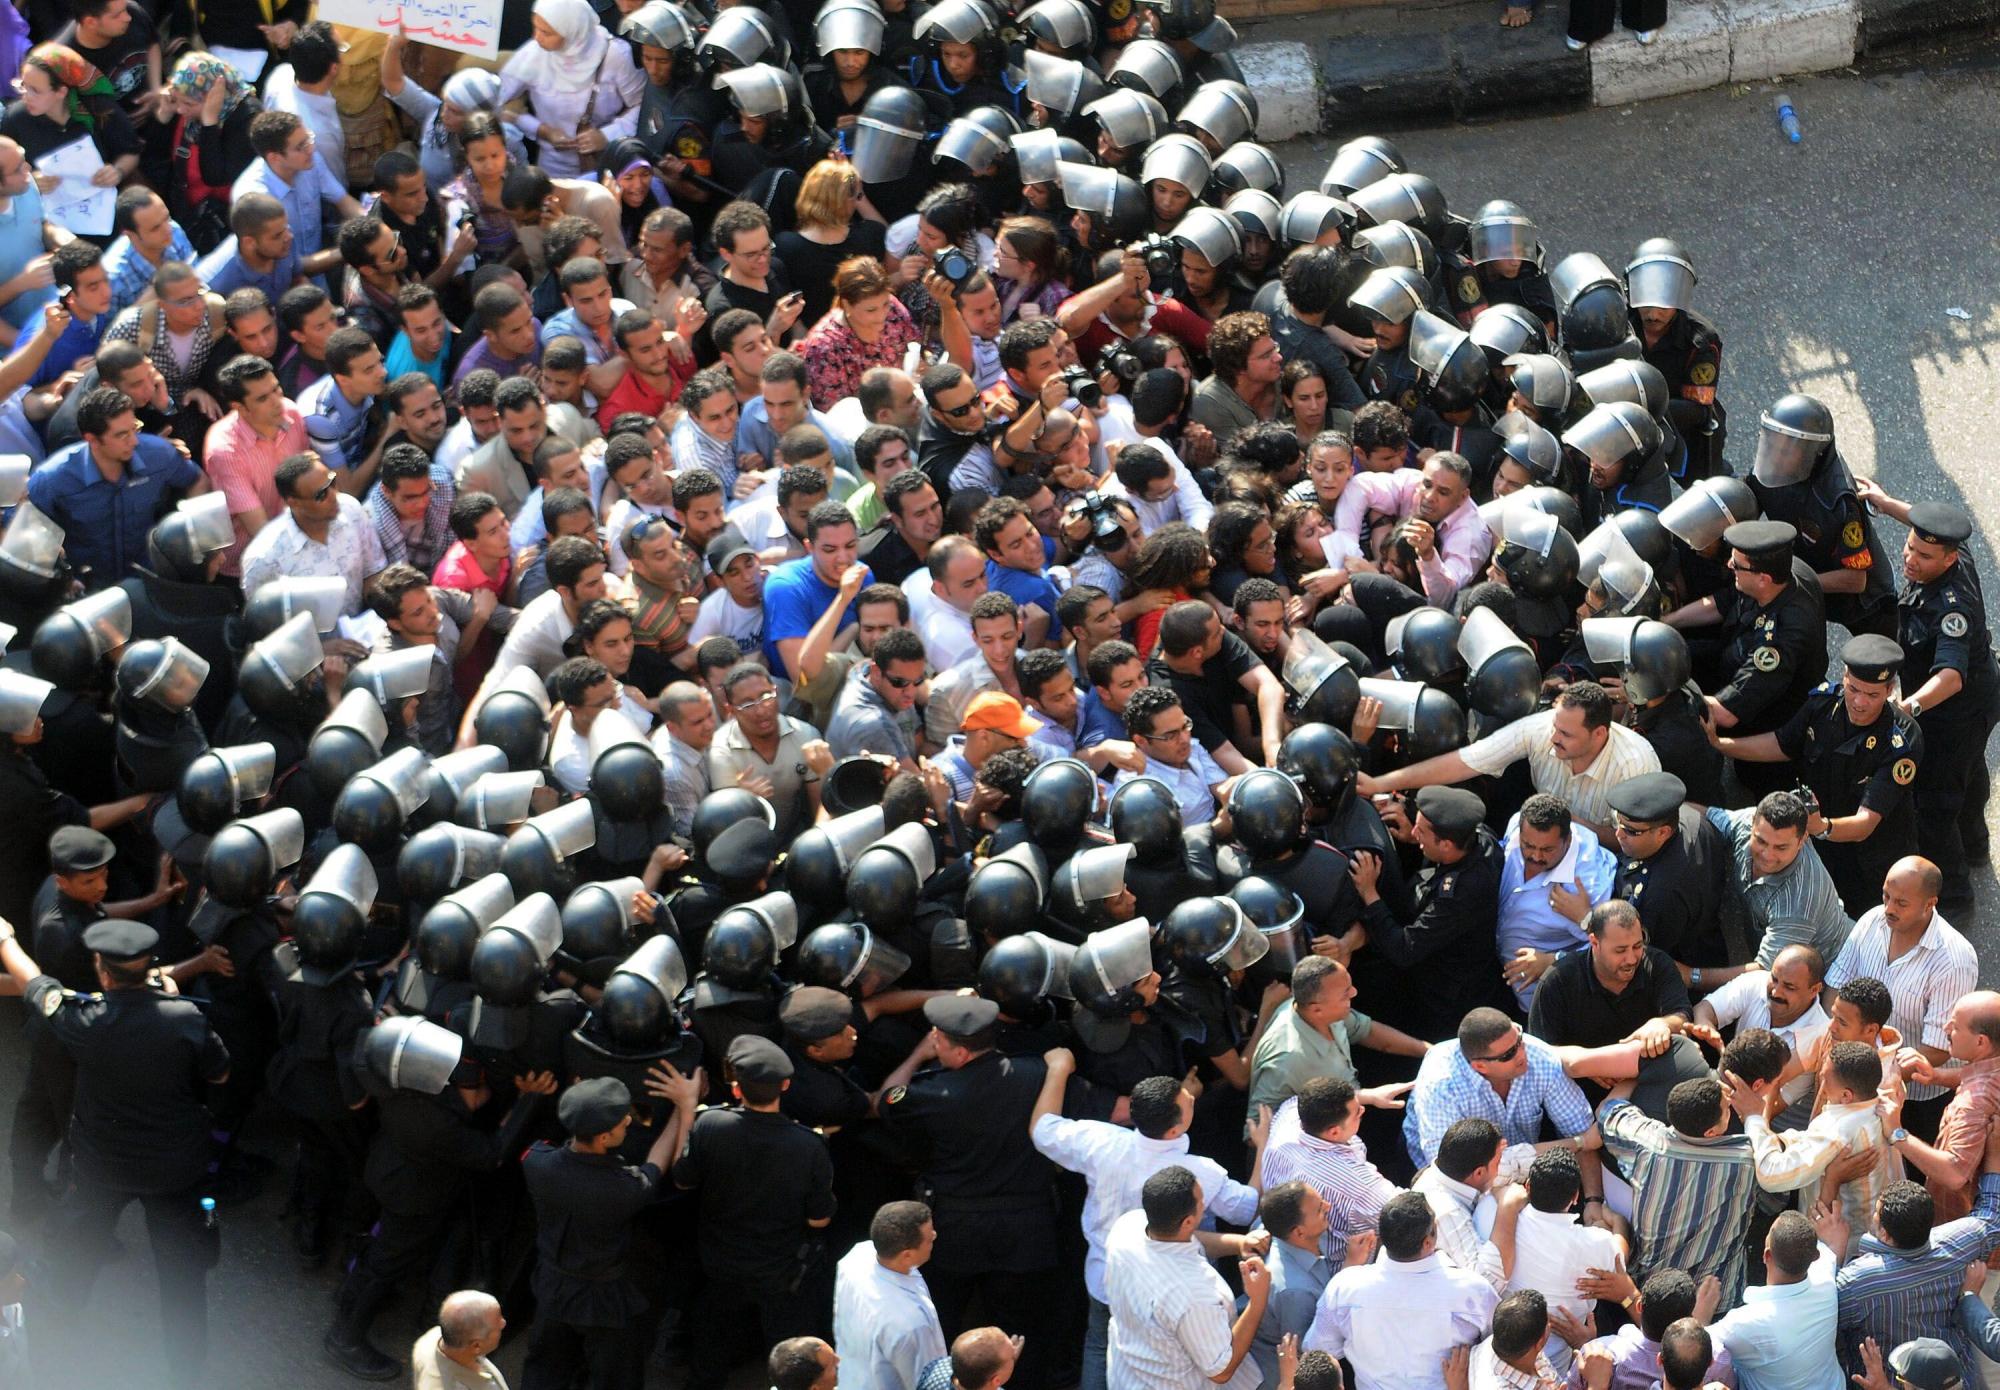 Egyptian protestors on June 13th 2010 surrounded by conscripts. Photo by Mohamed Abd El-Ghany (REUTERS / Alamy Stock Photo)